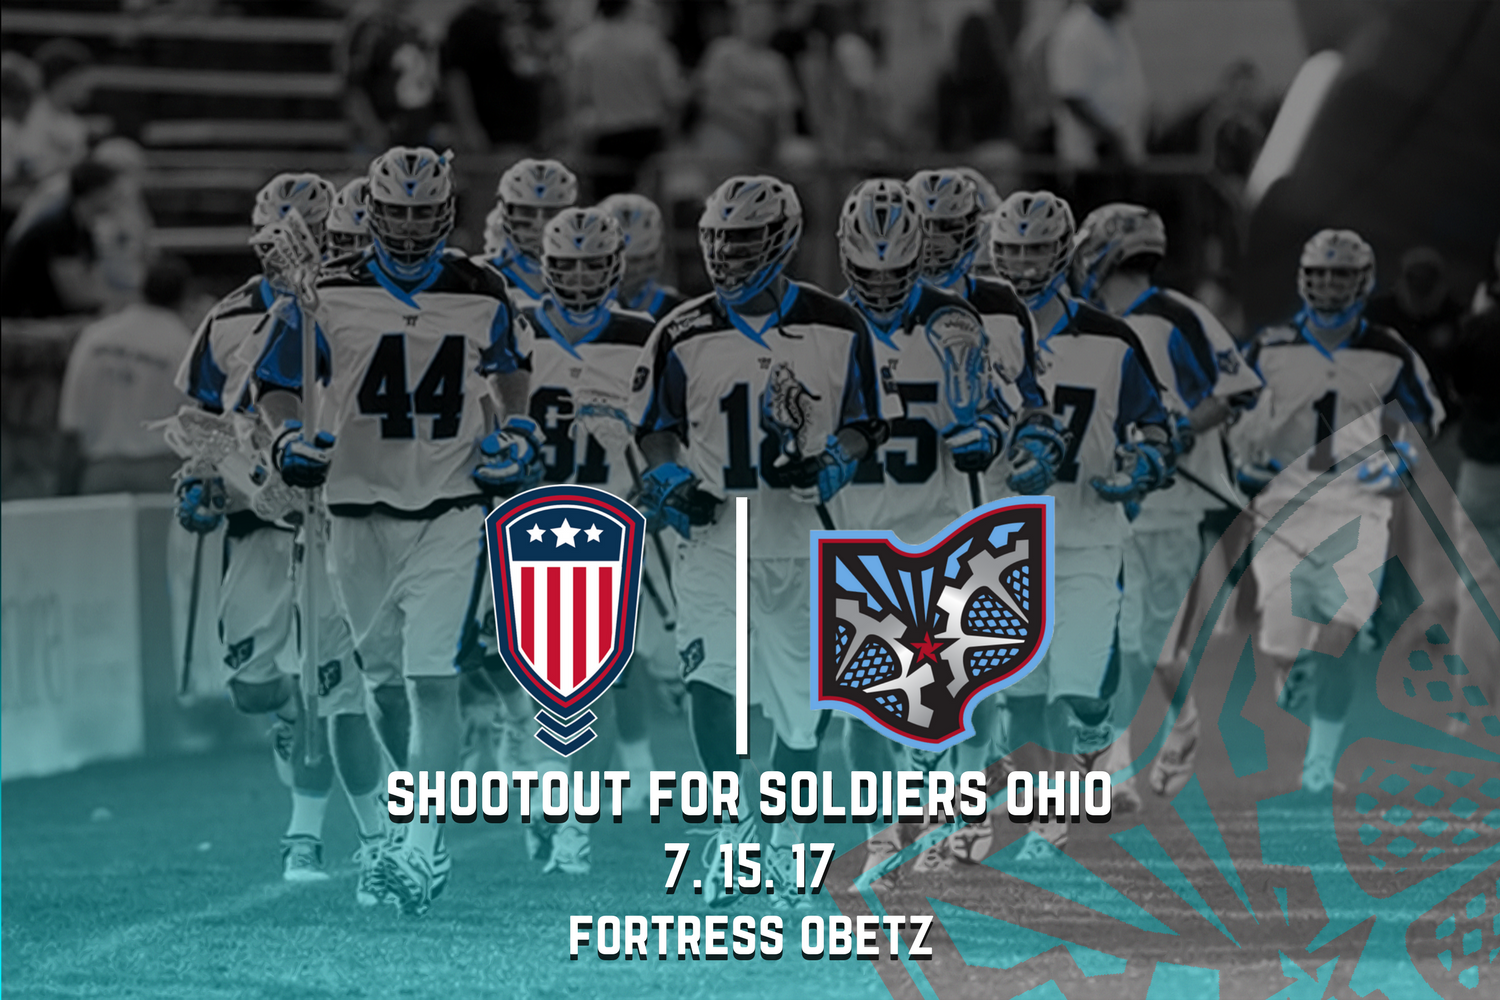 OHIO MACHINE TO HOST SHOOTOUT FOR SOLDIERS AT NEW STADIUM!